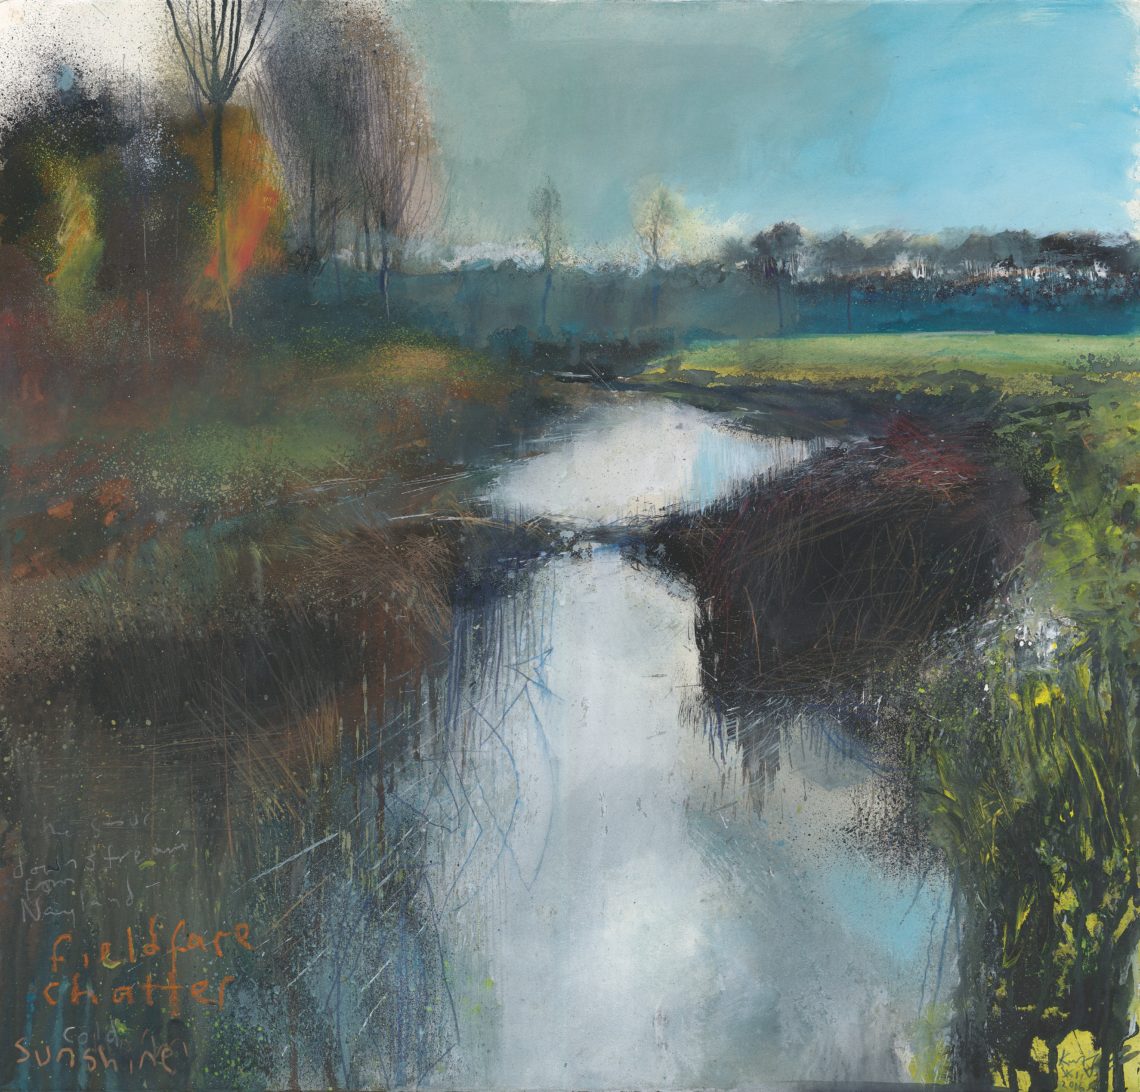 Kurt_Jackson_ST4_The_Stour_downstream_from_Nayland_fieldfare_chatter_Cold_sunshine_December_2016_Mixed_media_on_paper_57x60cm